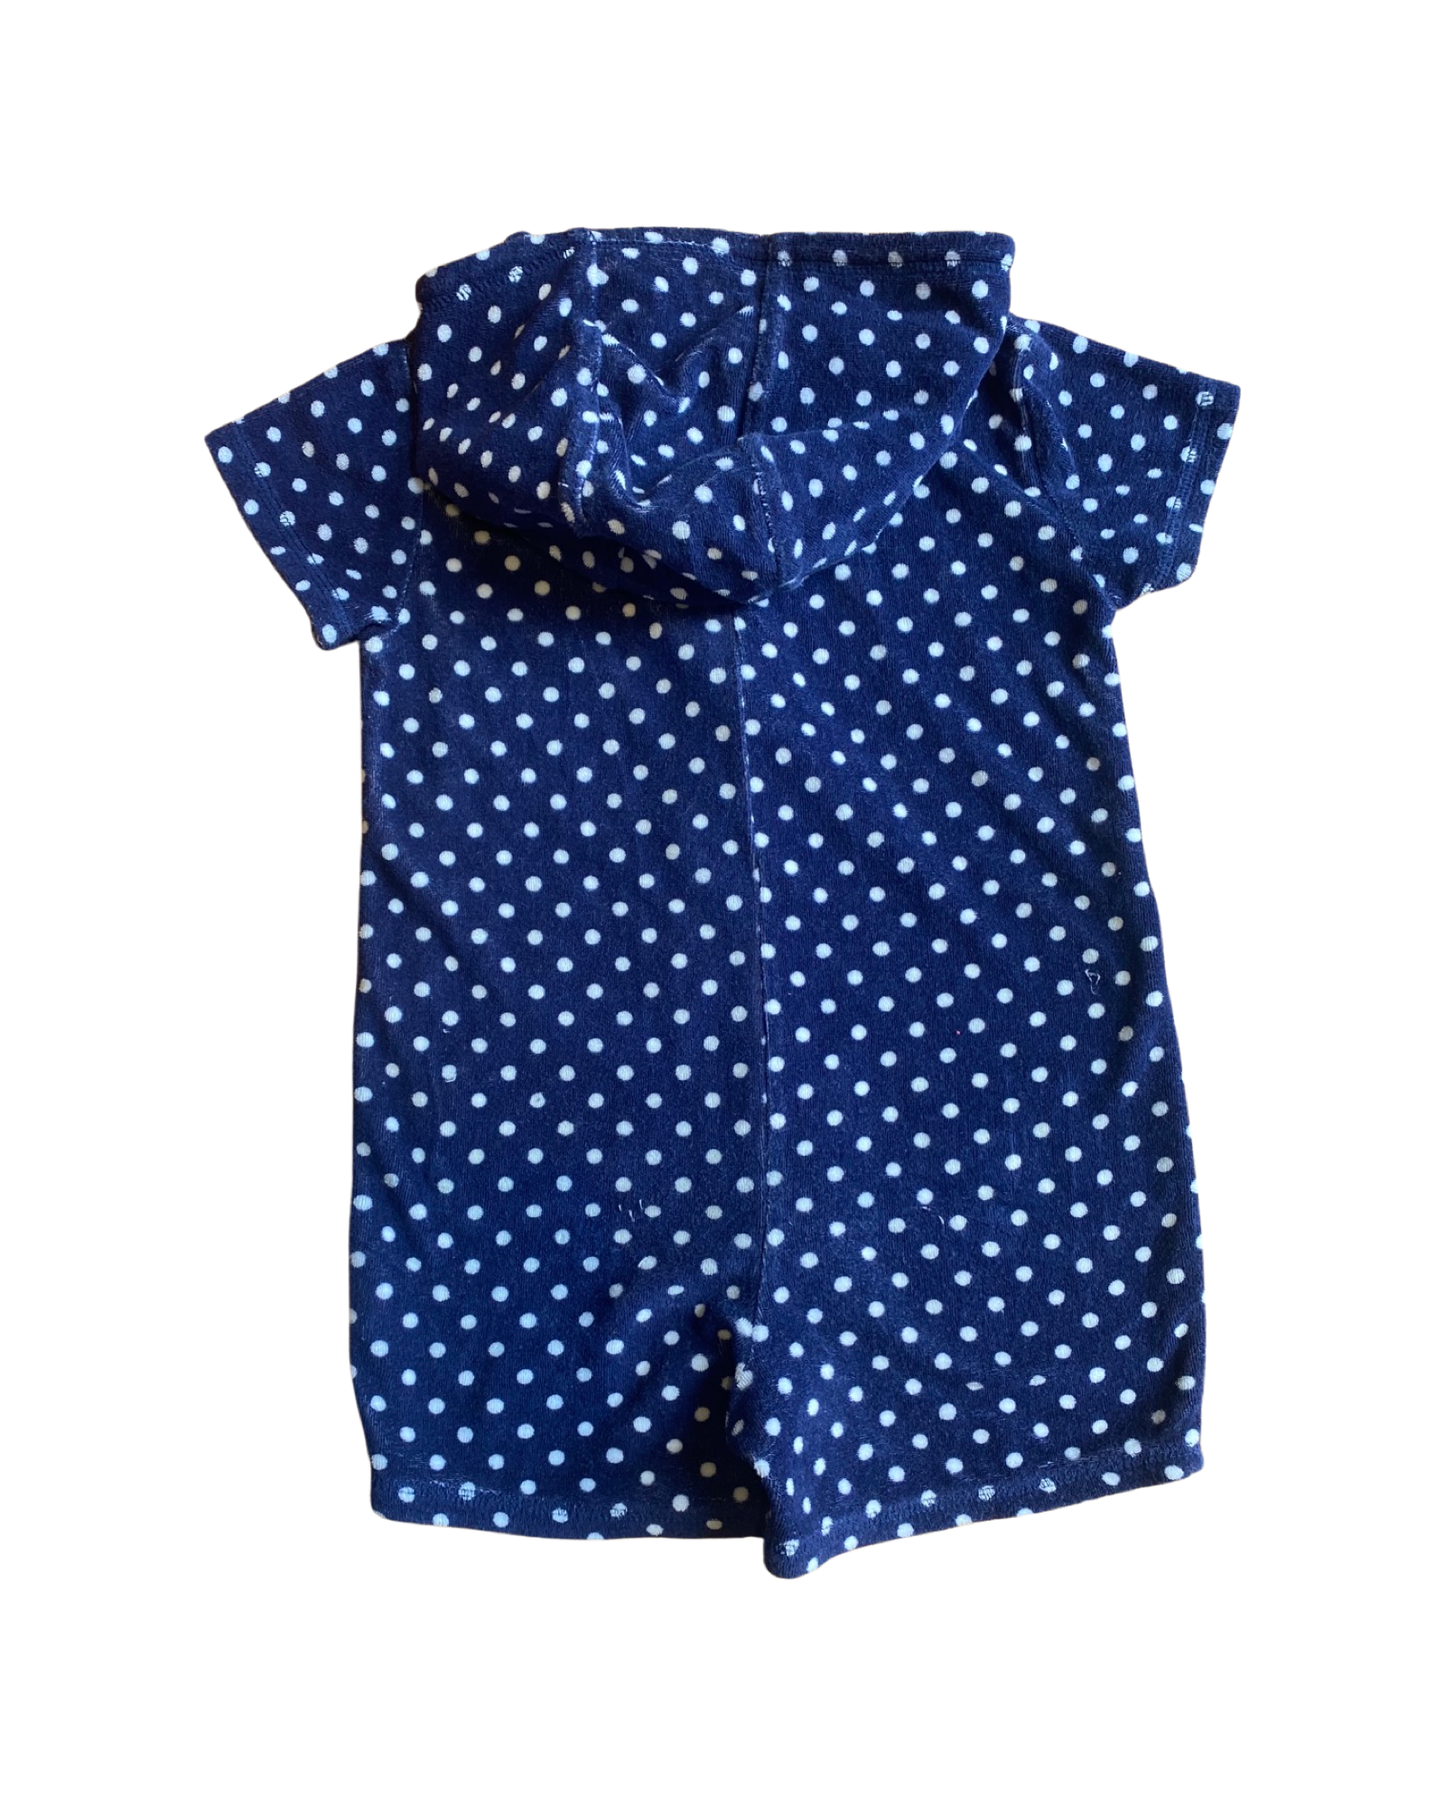 M&S towelling romper ( size 3-4yrs)